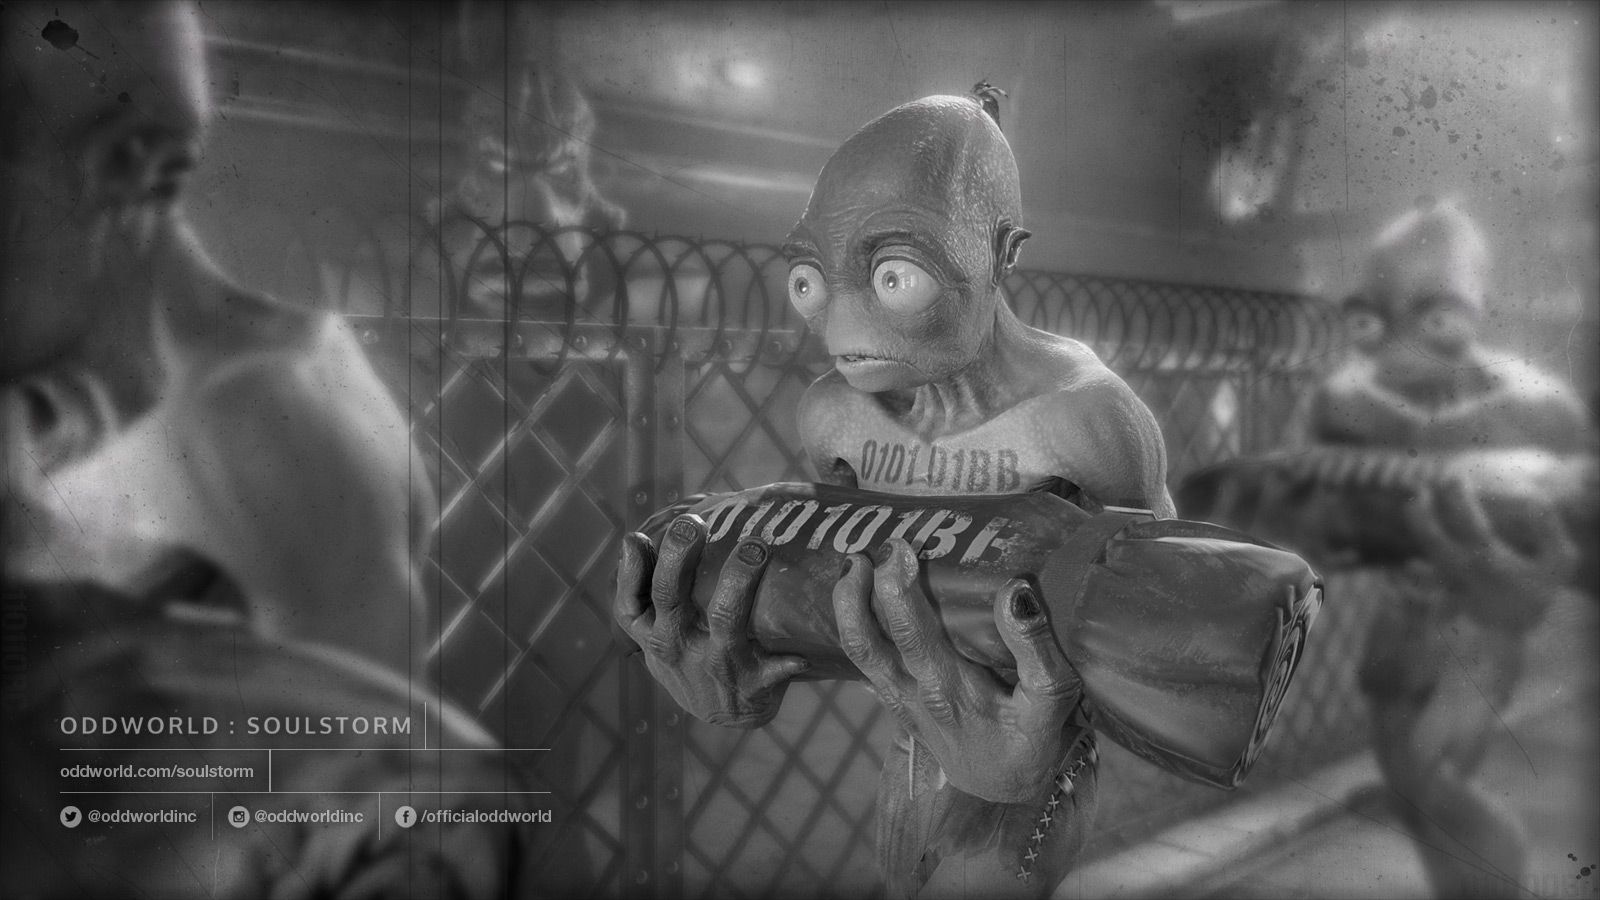 Oddworld: Soulstorm reveals first batch of image in community ARG